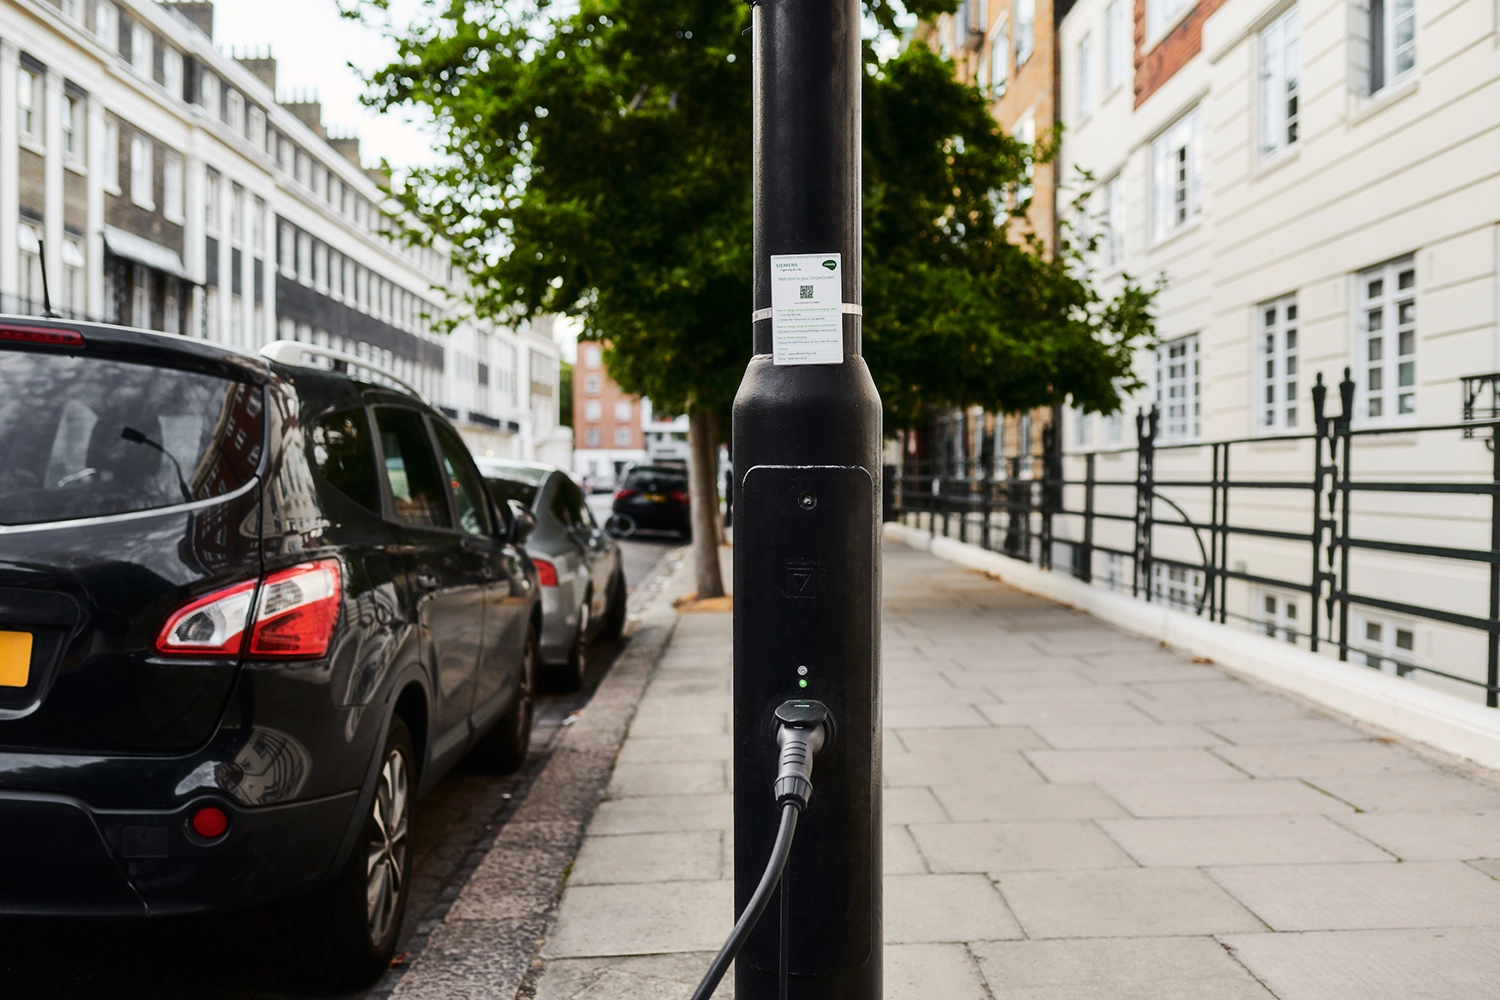 ubitricity and UK Power Networks Sign Agreement to Add Flexibility to EV Charging by Shifting Demand Away from Peak Hours